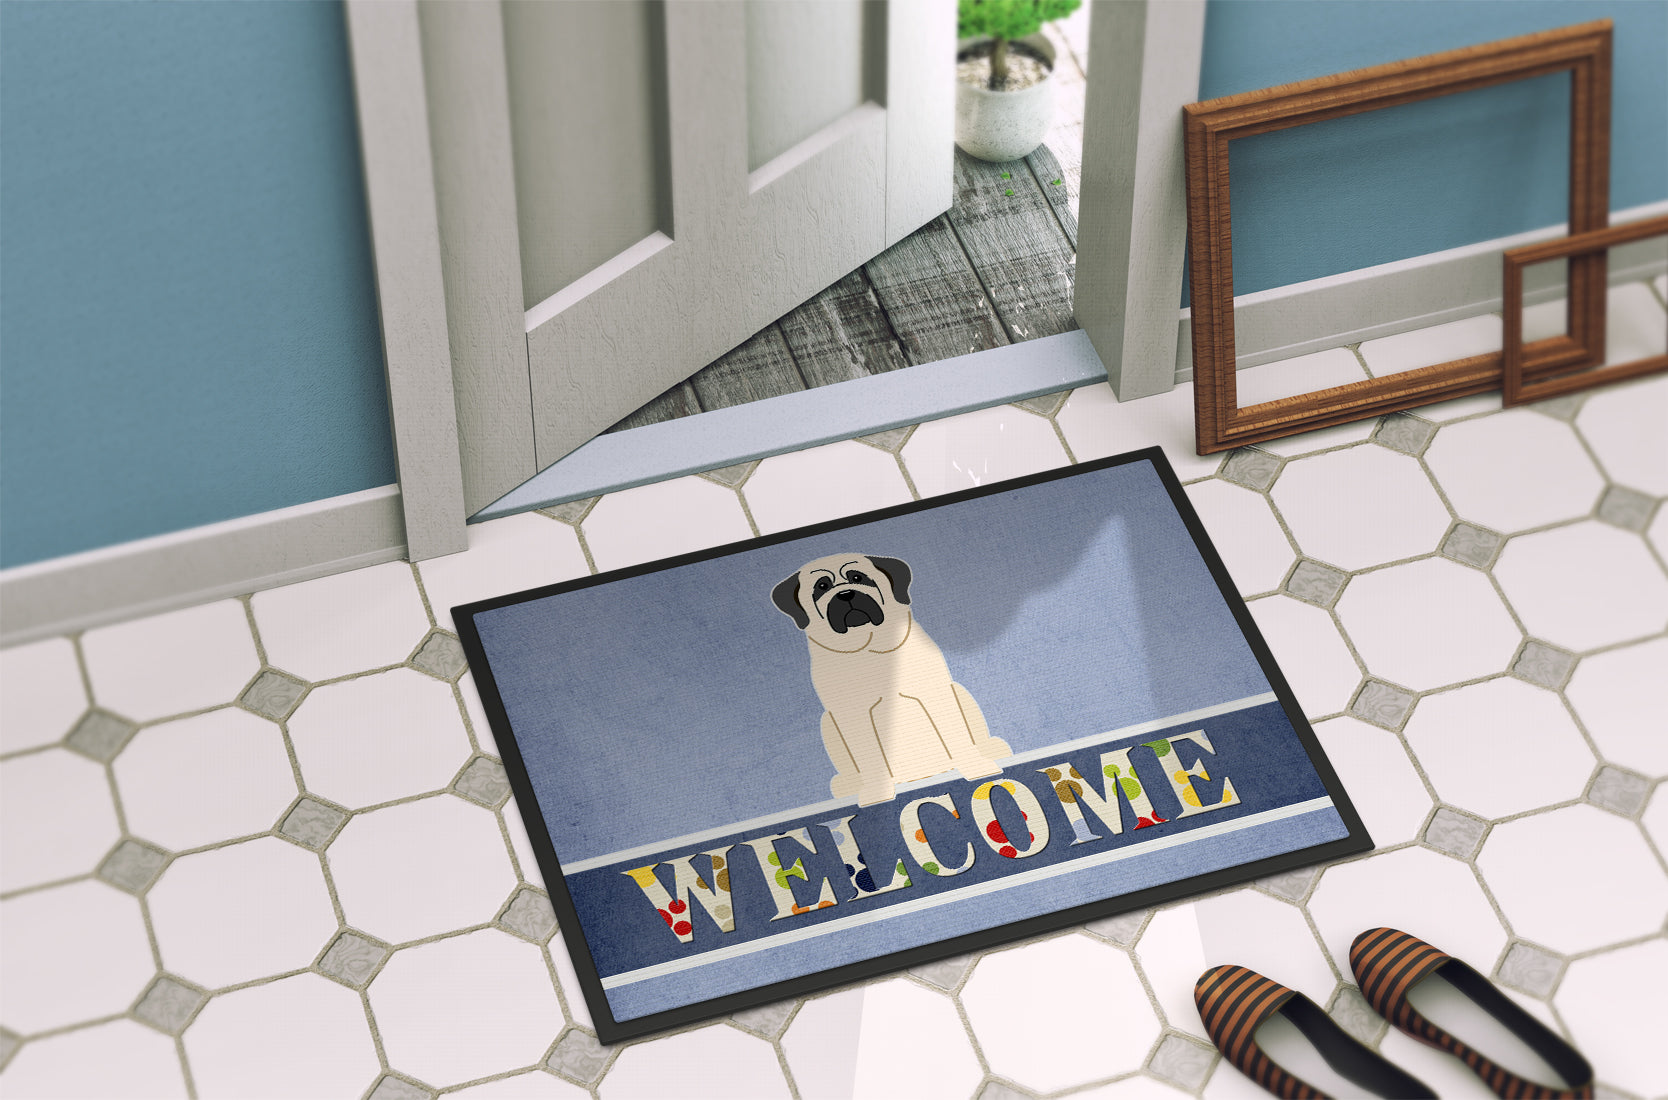 Mastiff White Welcome Indoor or Outdoor Mat 18x27 BB5598MAT - the-store.com